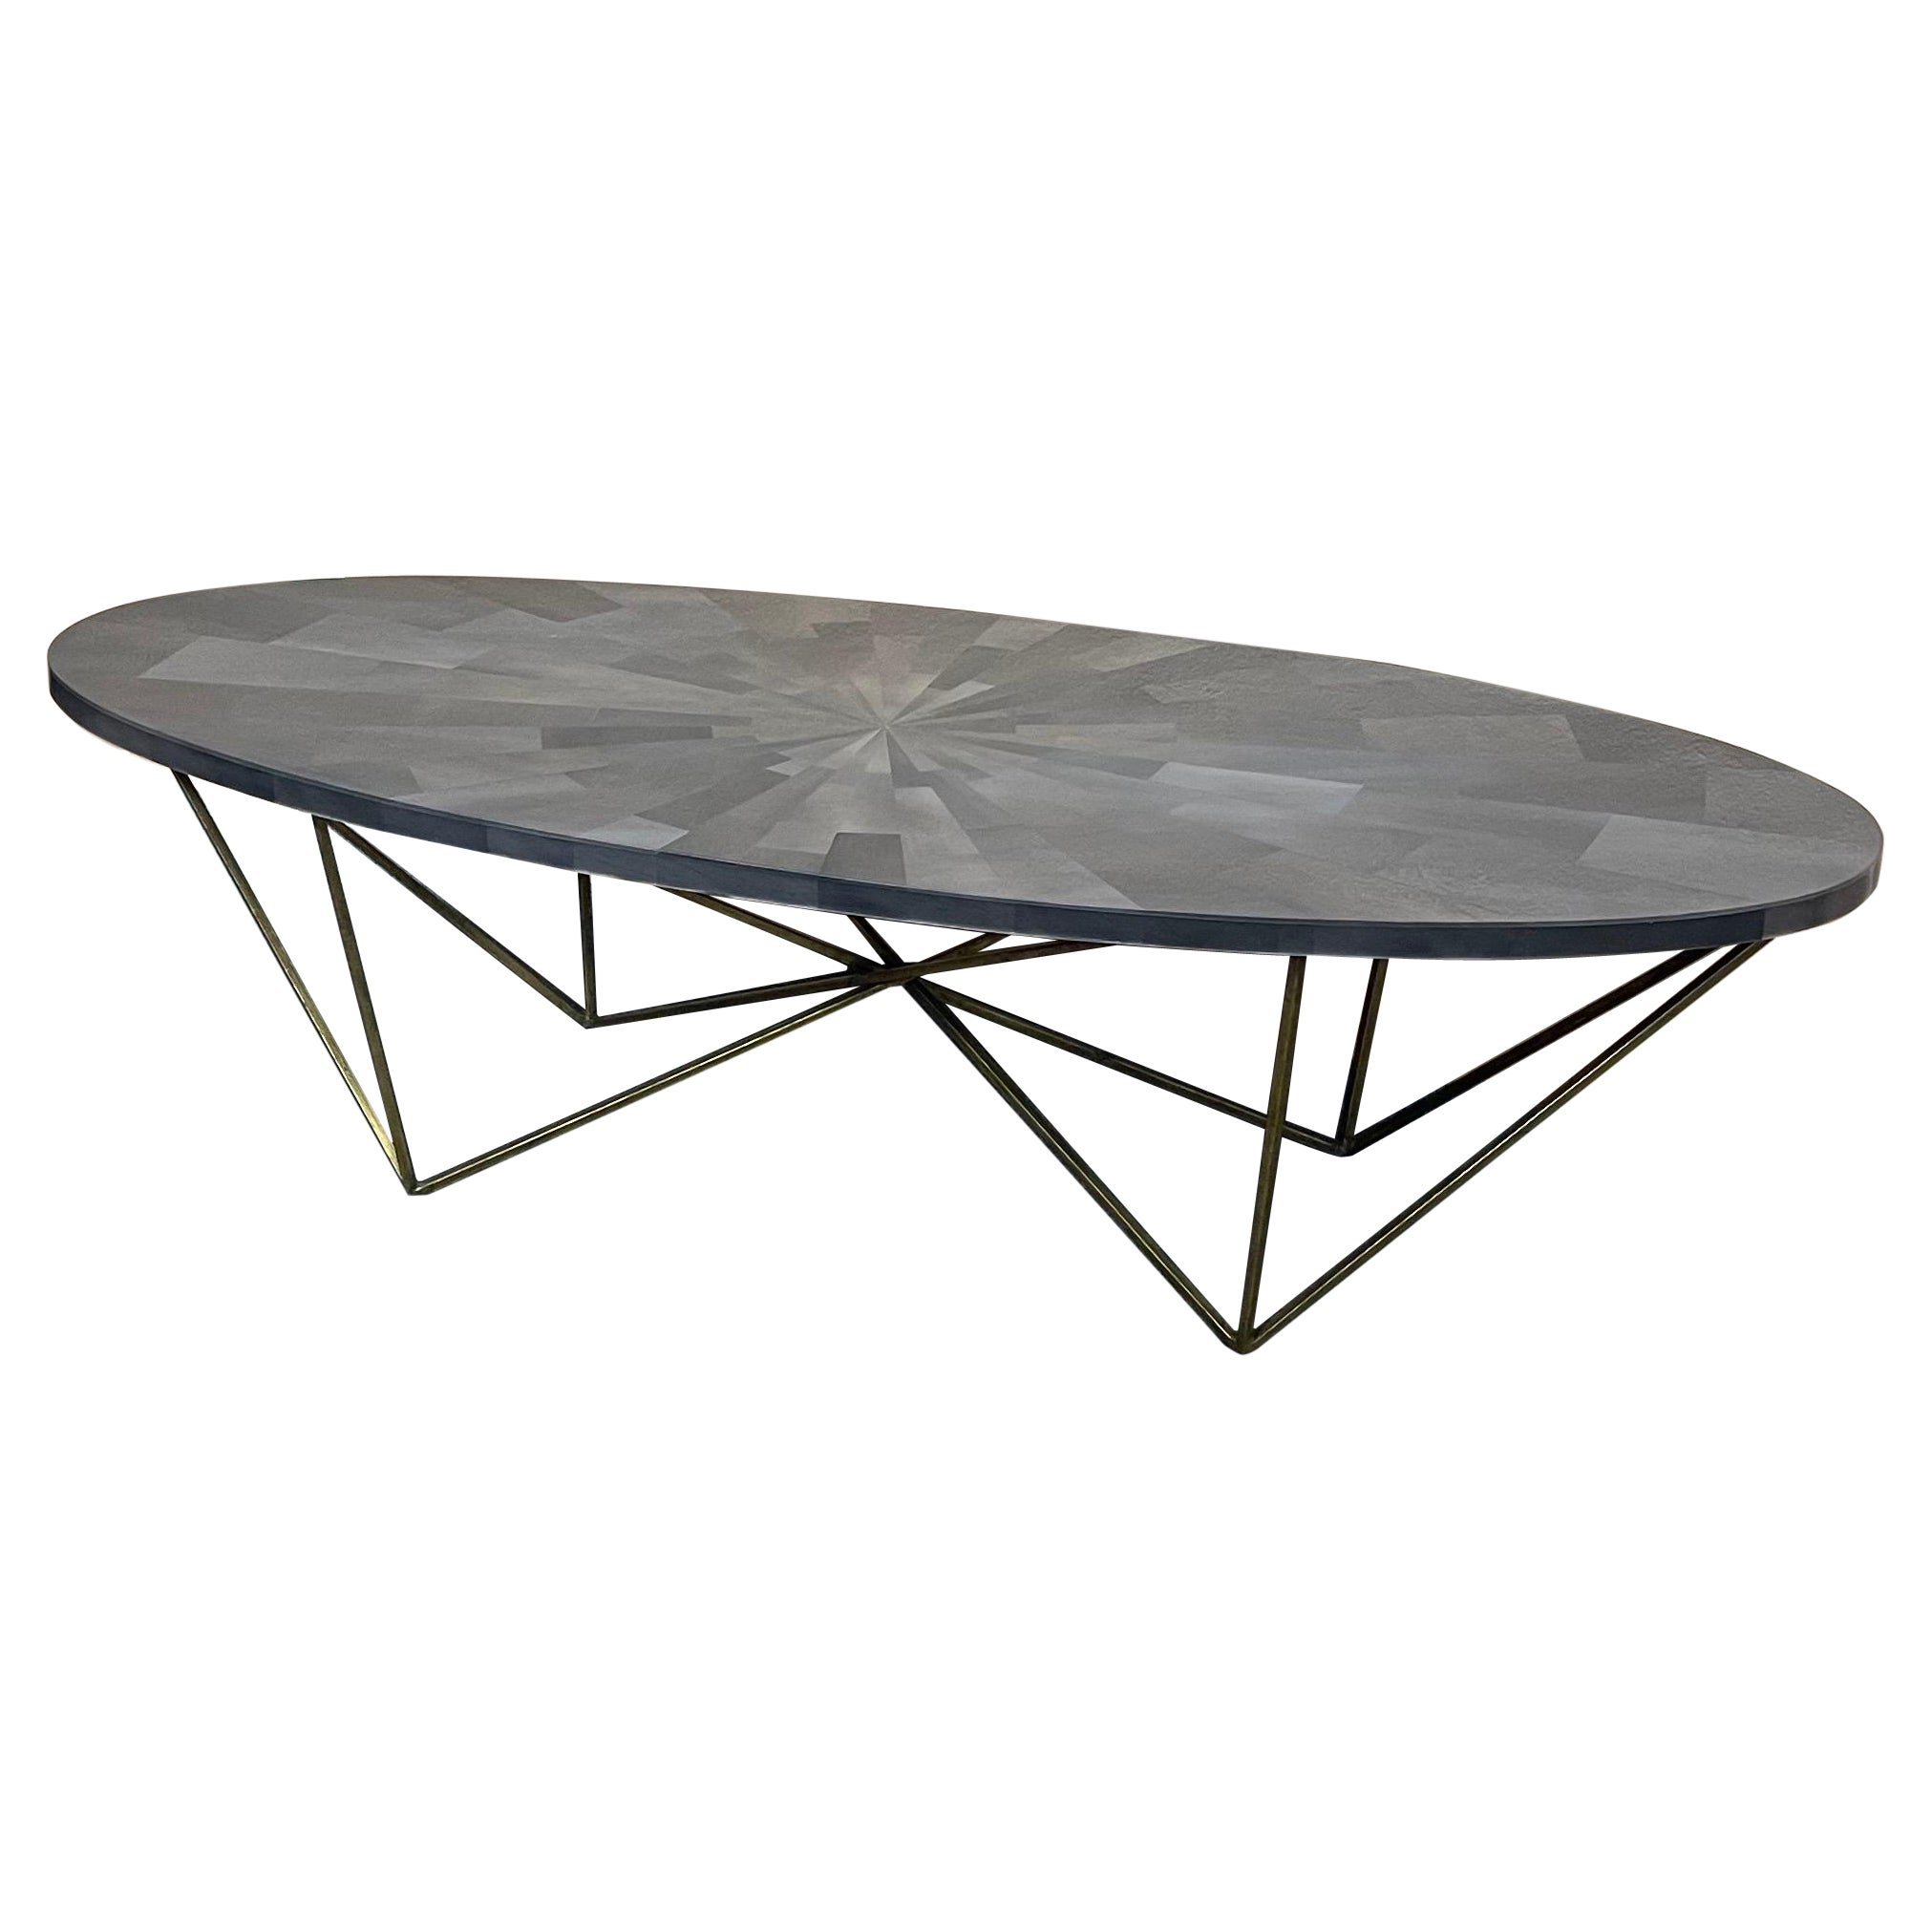 The "George" Oval Mosaic Coffee Table with Sunburst Top by Oly Studios For Sale